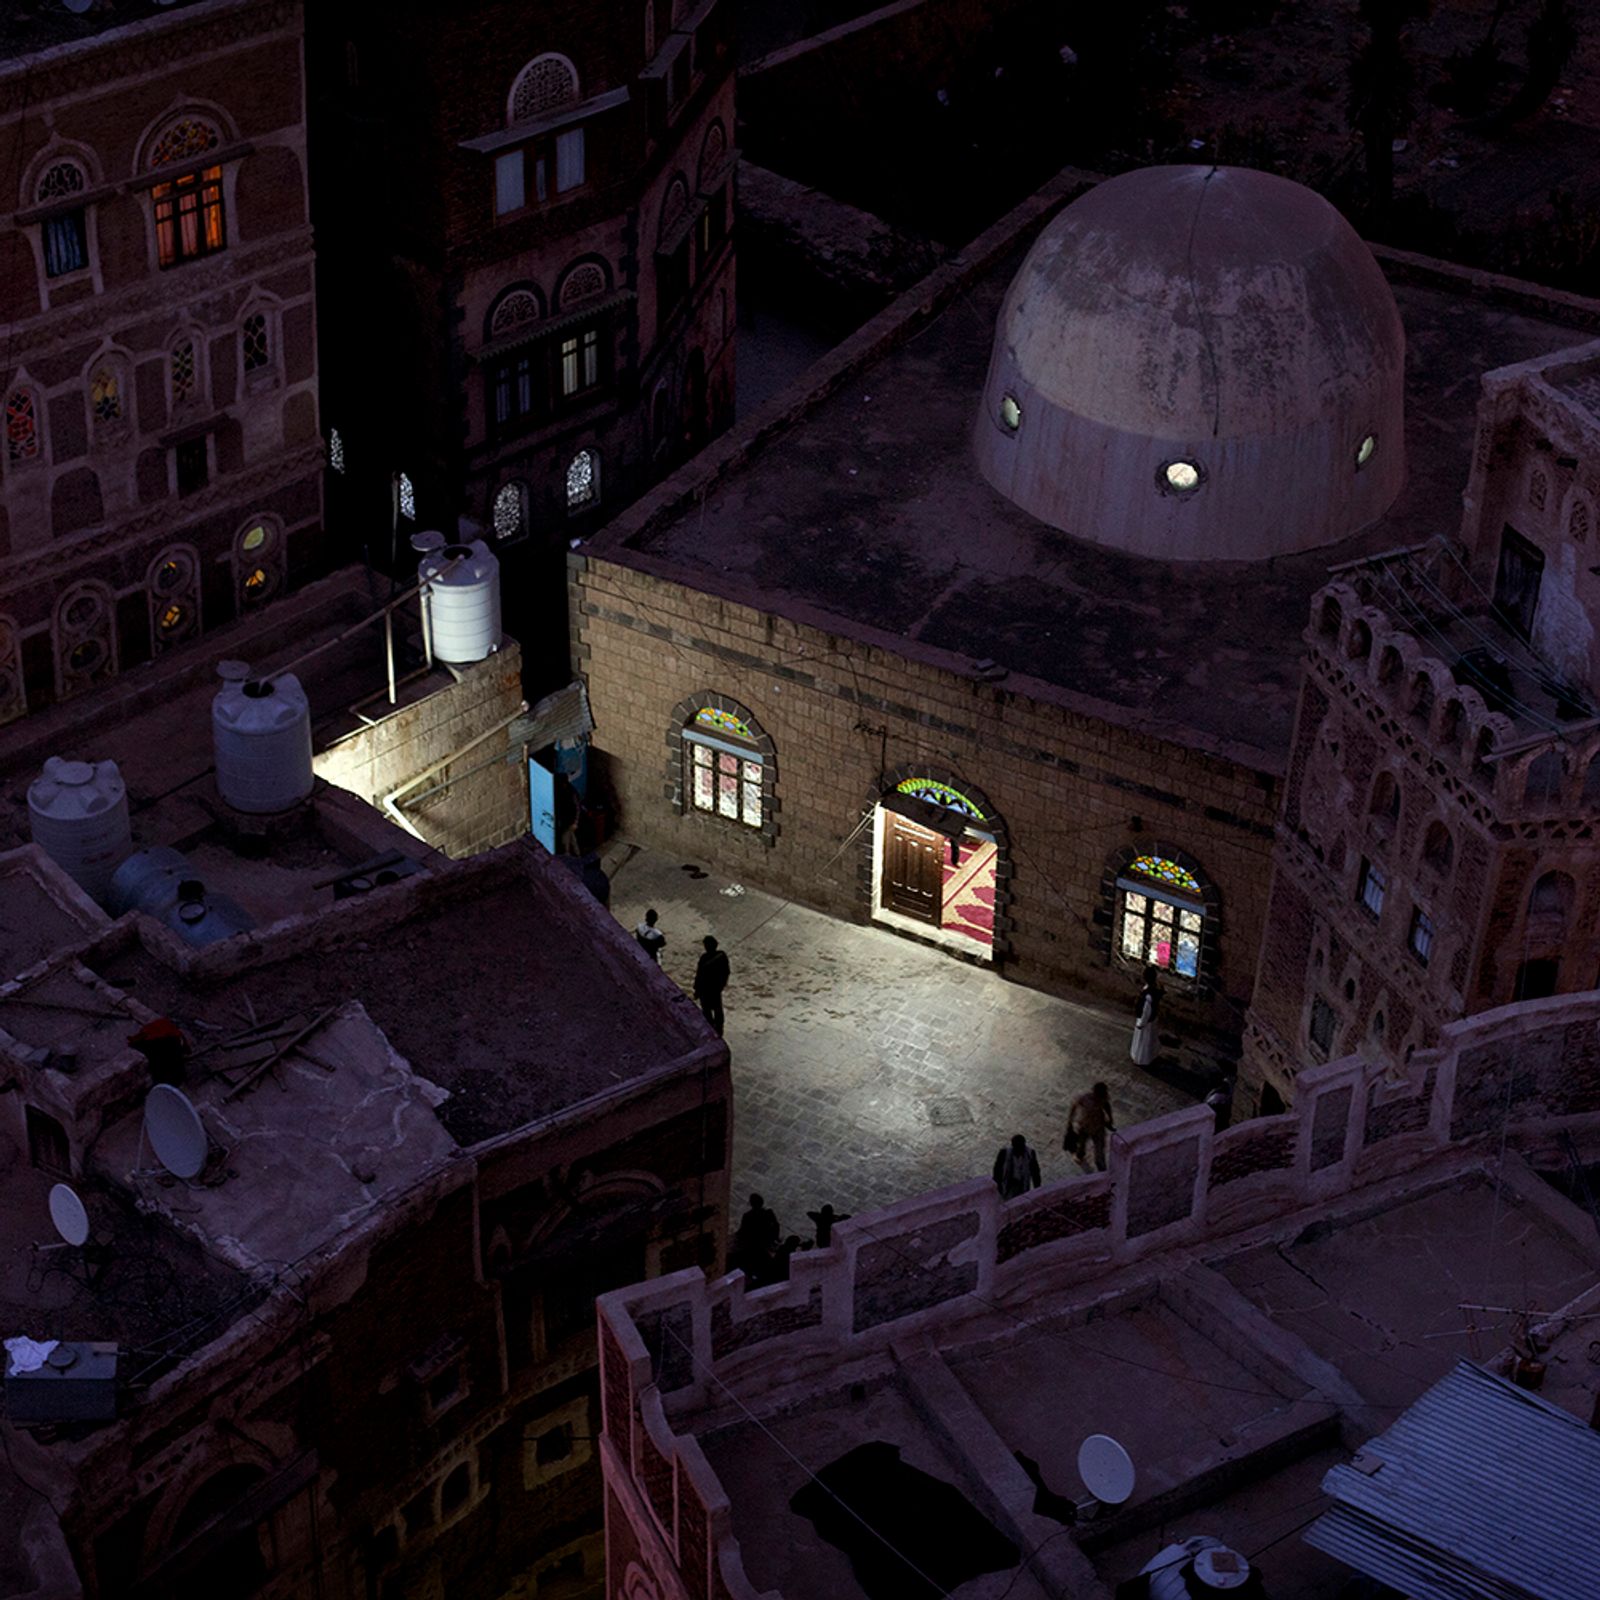 © Loulou d’Aki - View over a mosque at dusk in the Sana’a Old City, Yemen.